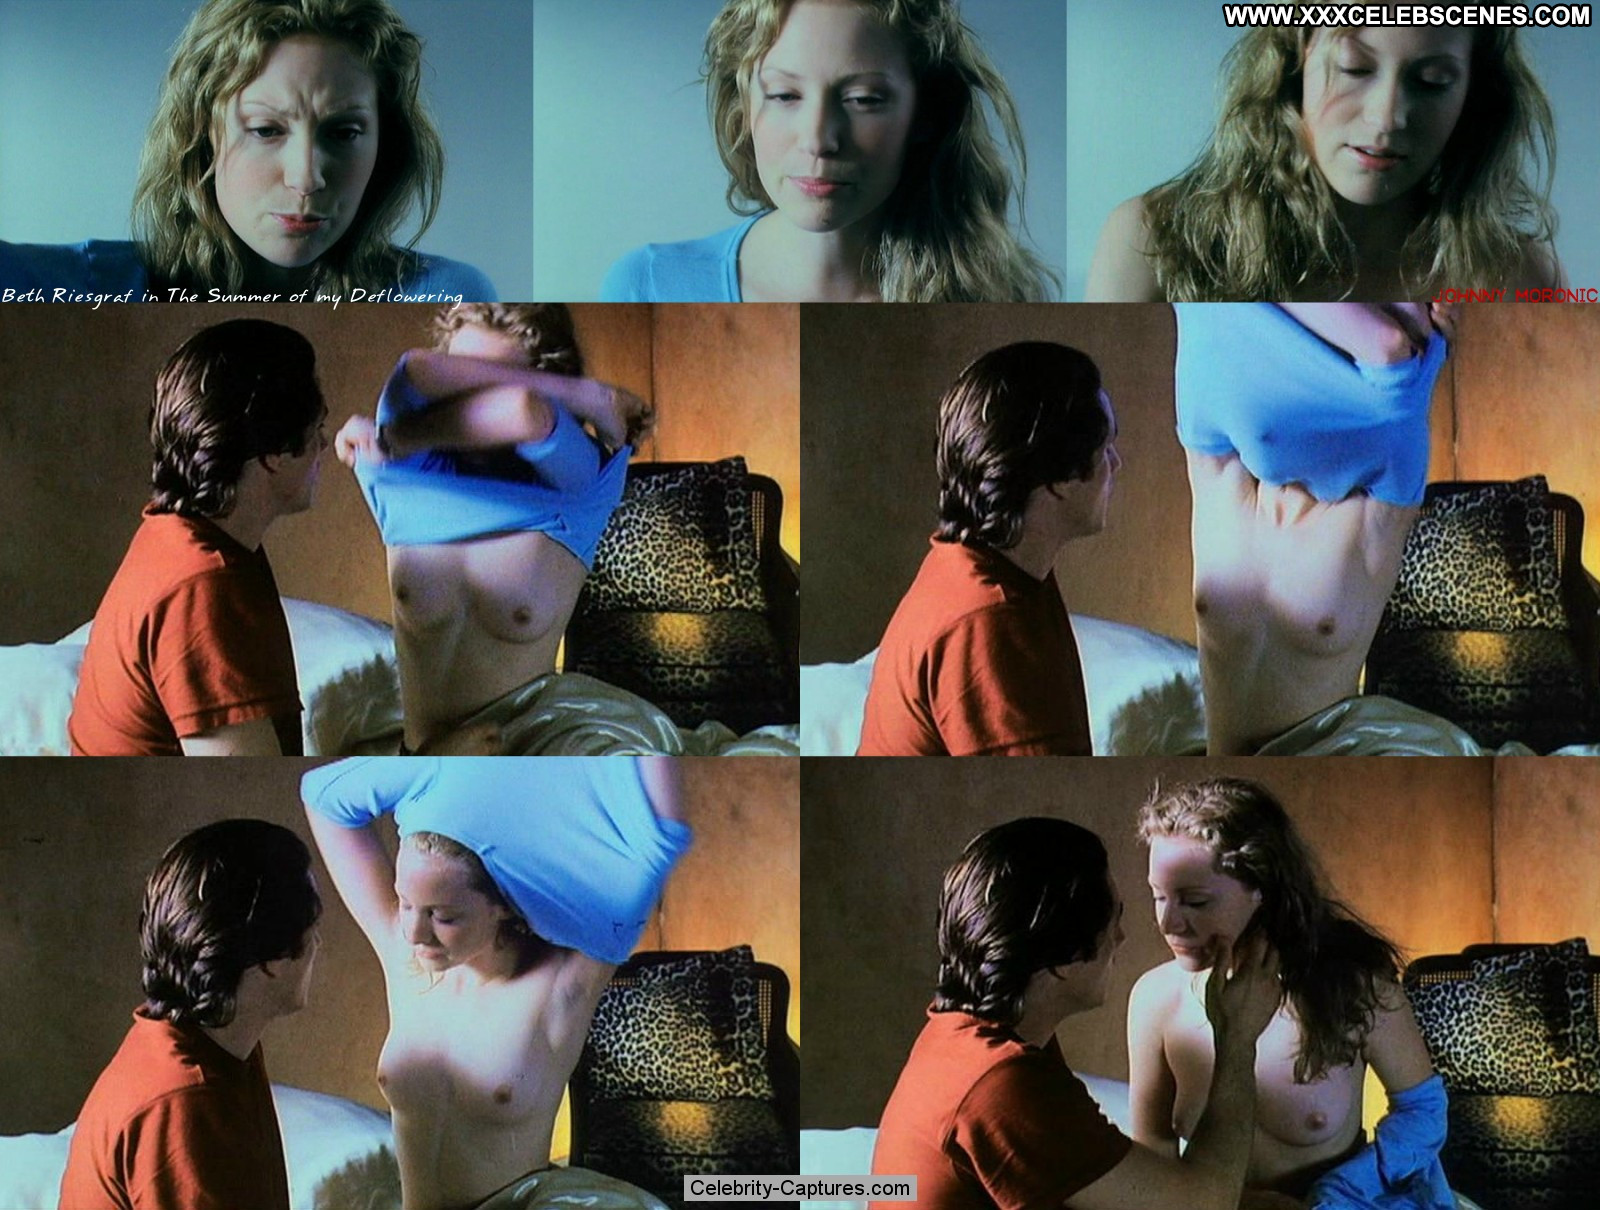 Beth Riesgraf Nude The Fappening.